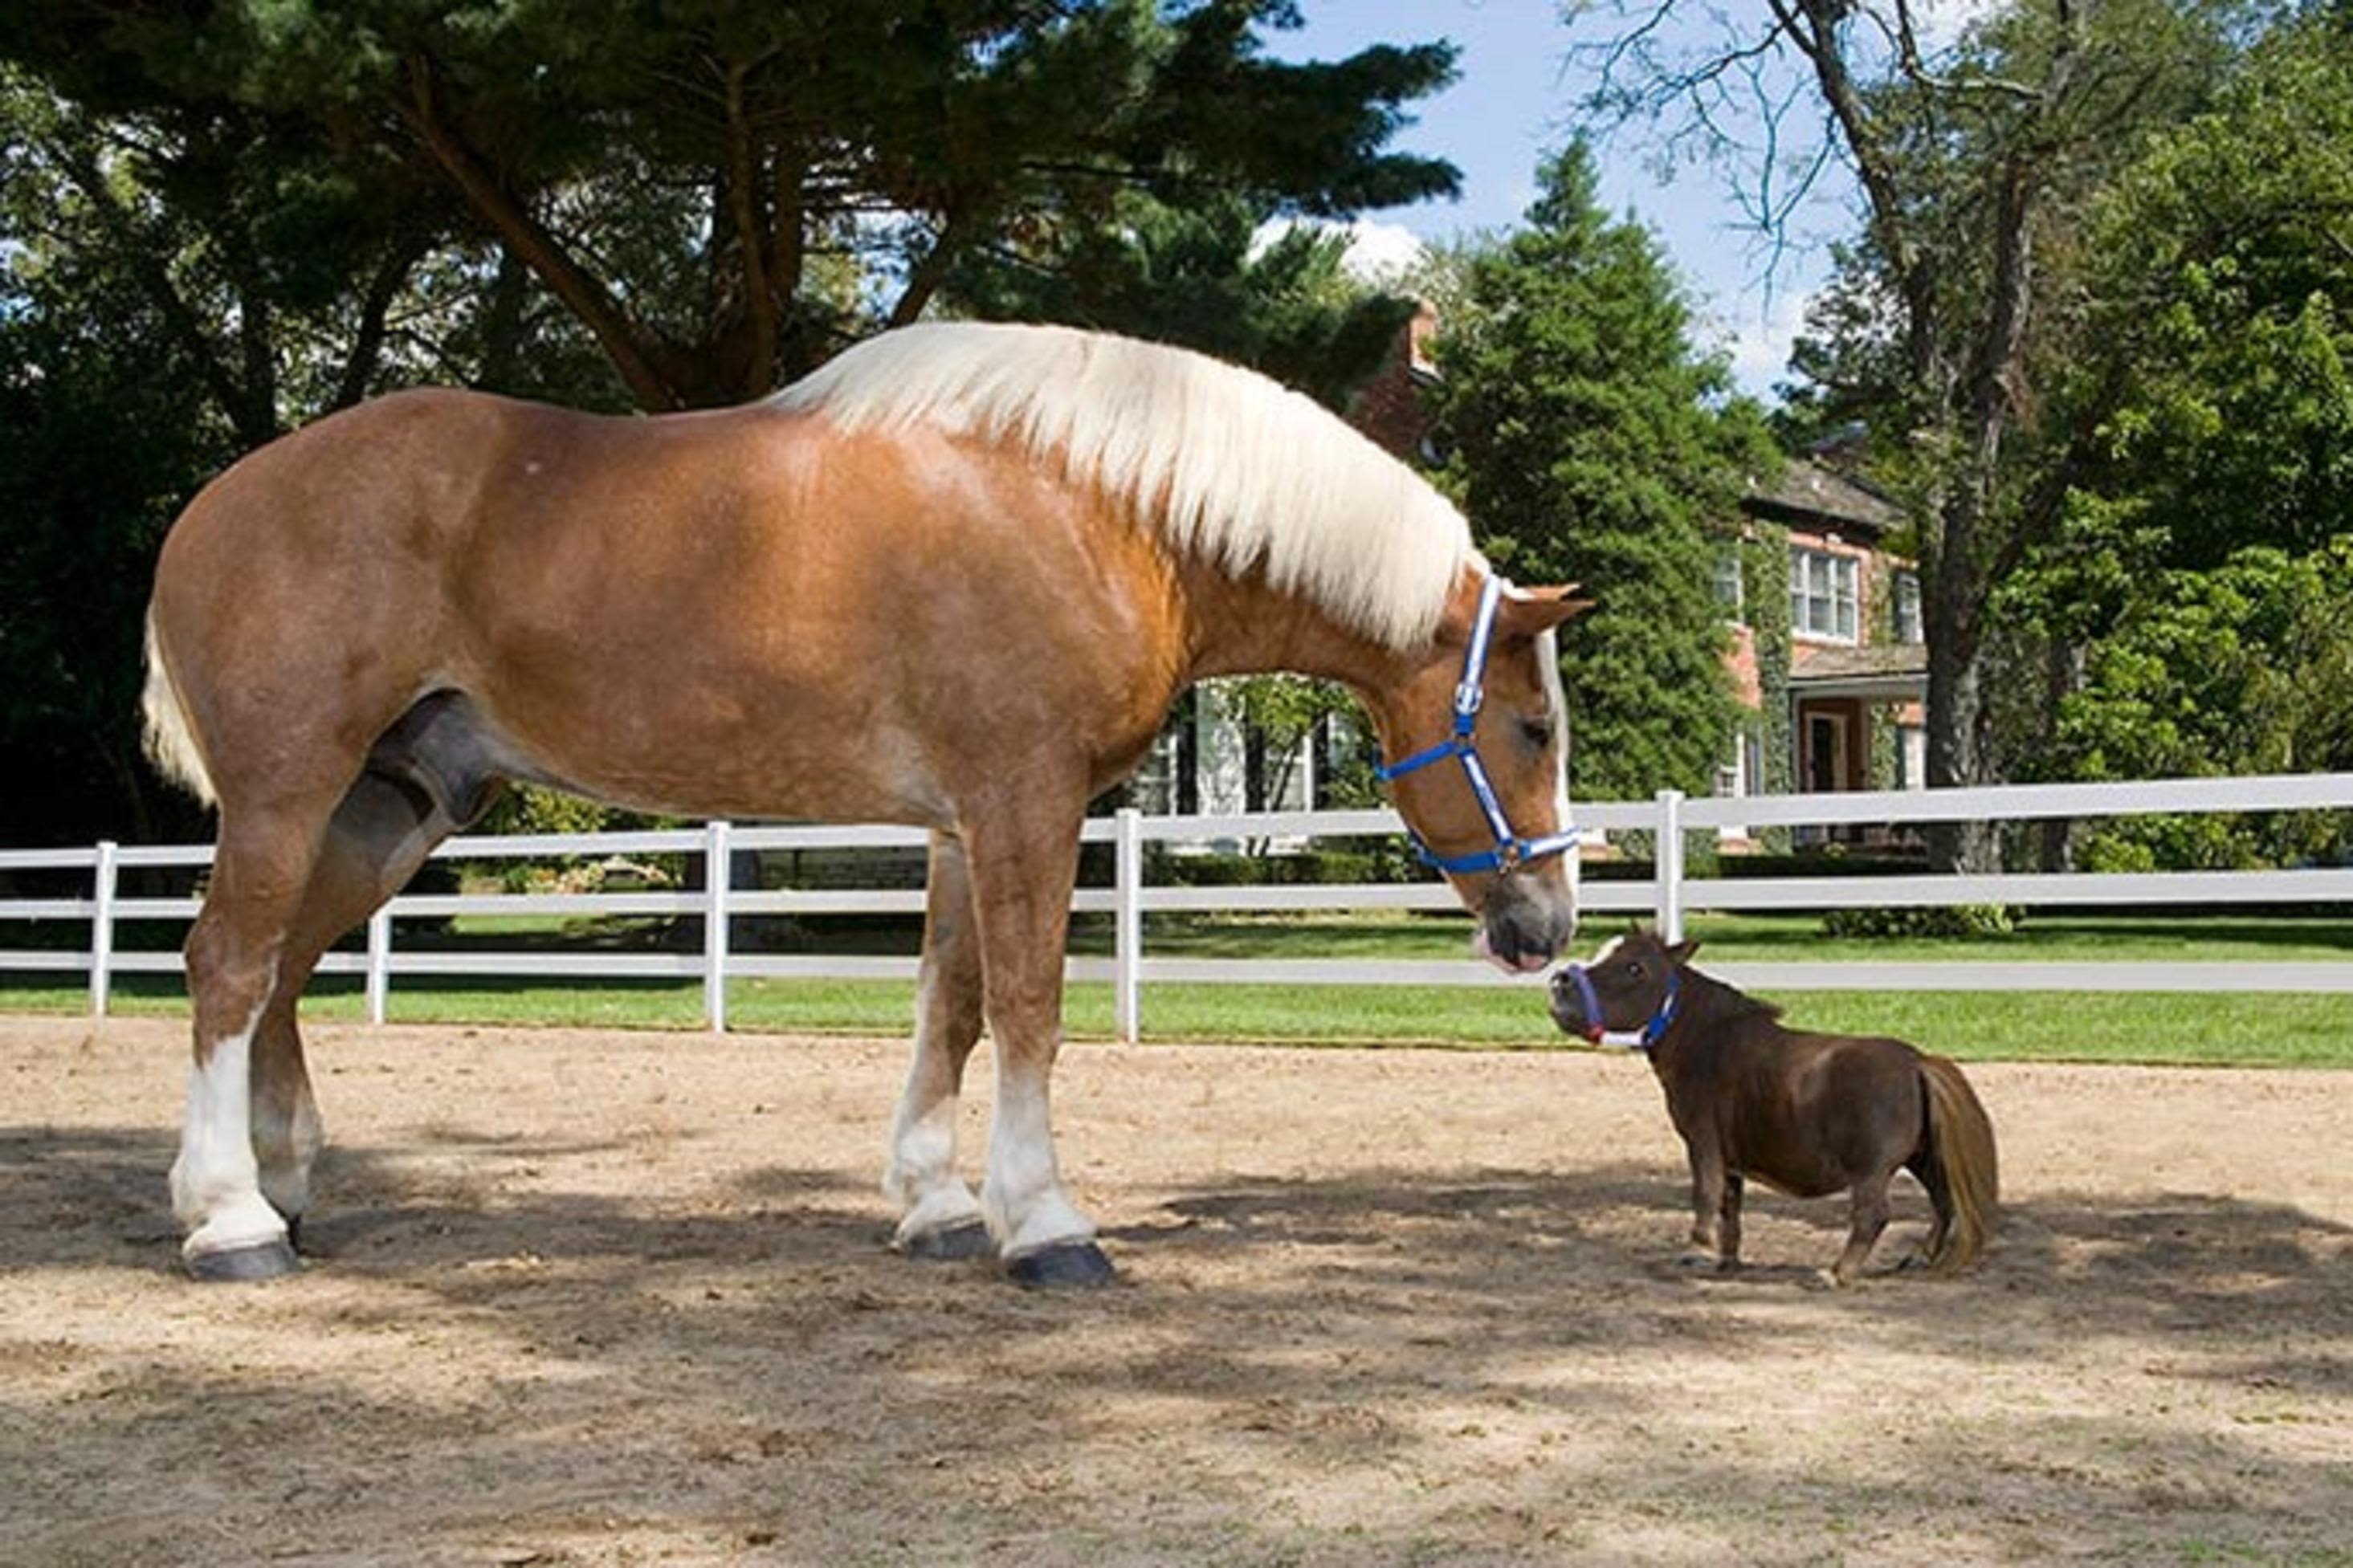 largest horse breed in the world